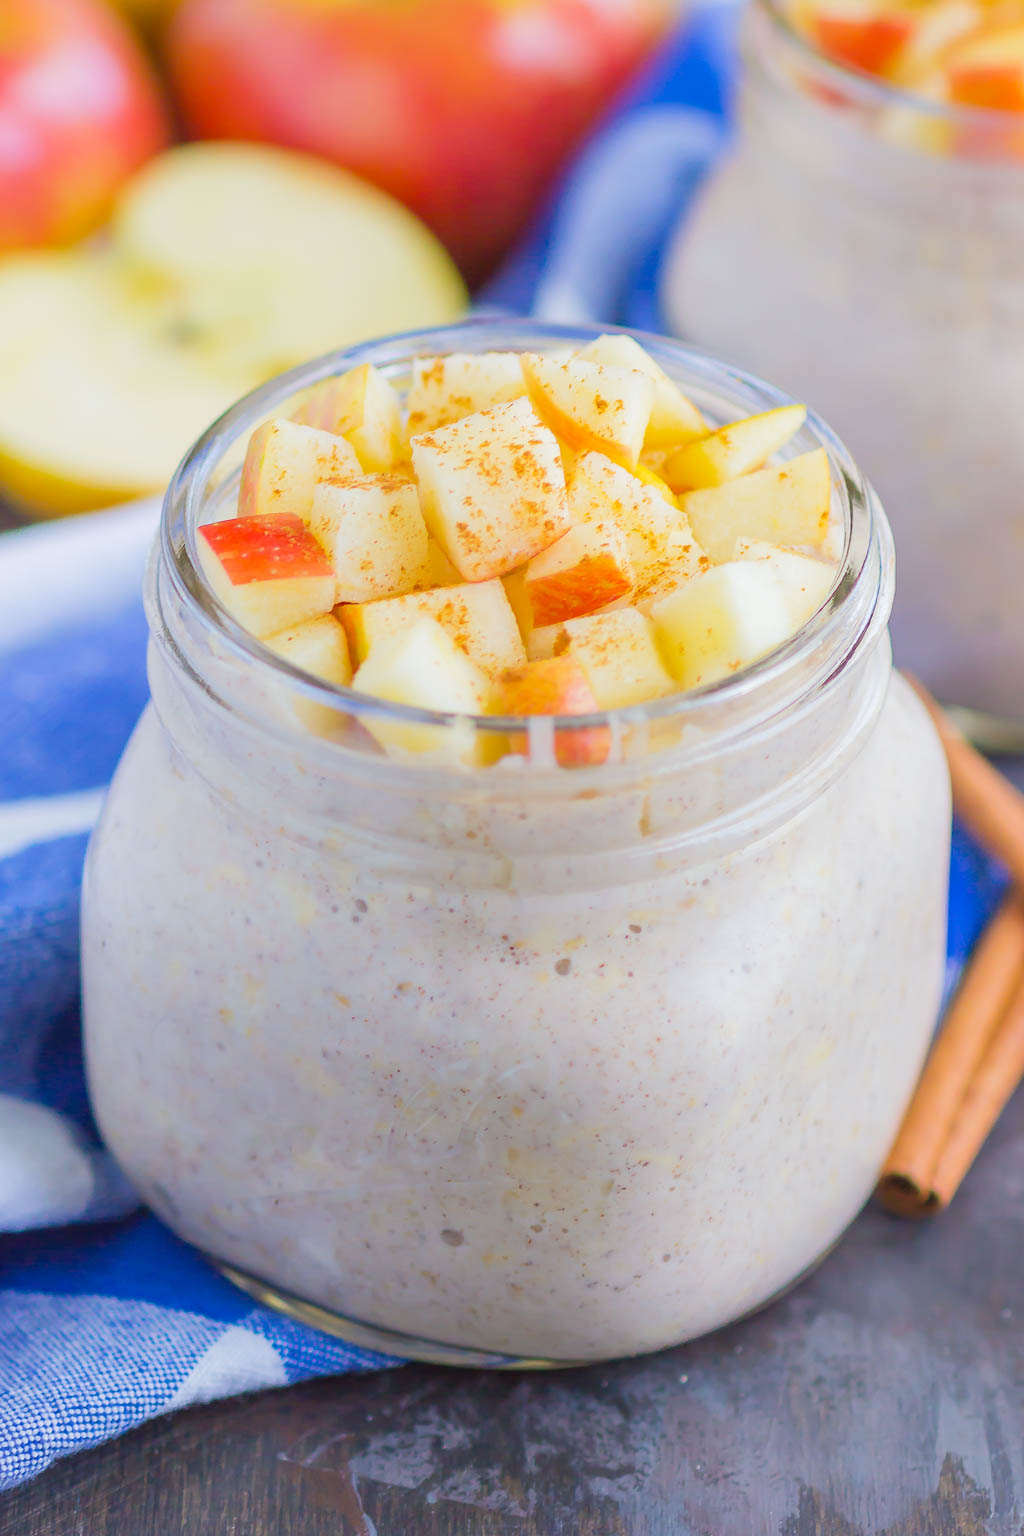 Apple Pie Overnight Oats are a simple, make-ahead breakfast for busy mornings. With just five minutes of prep time and no oven required, this hearty dish is filled with cozy flavors and perfect to keep you going all morning long! #overnightoats #oats #oatmeal #appleovernightoats #applepie #applebreakfast #makeahead #makeaheadbreakfast